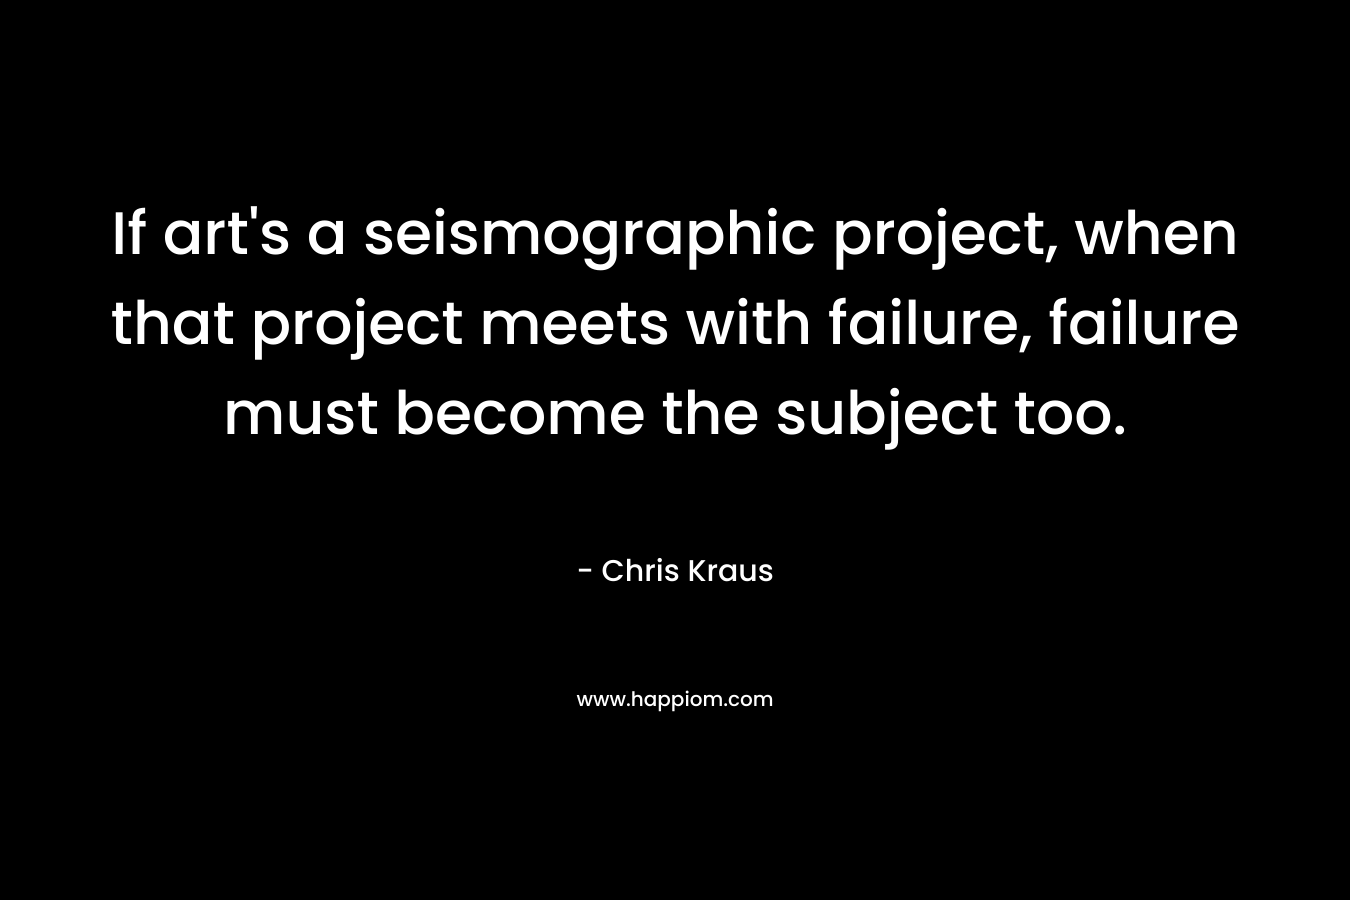 If art’s a seismographic project, when that project meets with failure, failure must become the subject too. – Chris Kraus